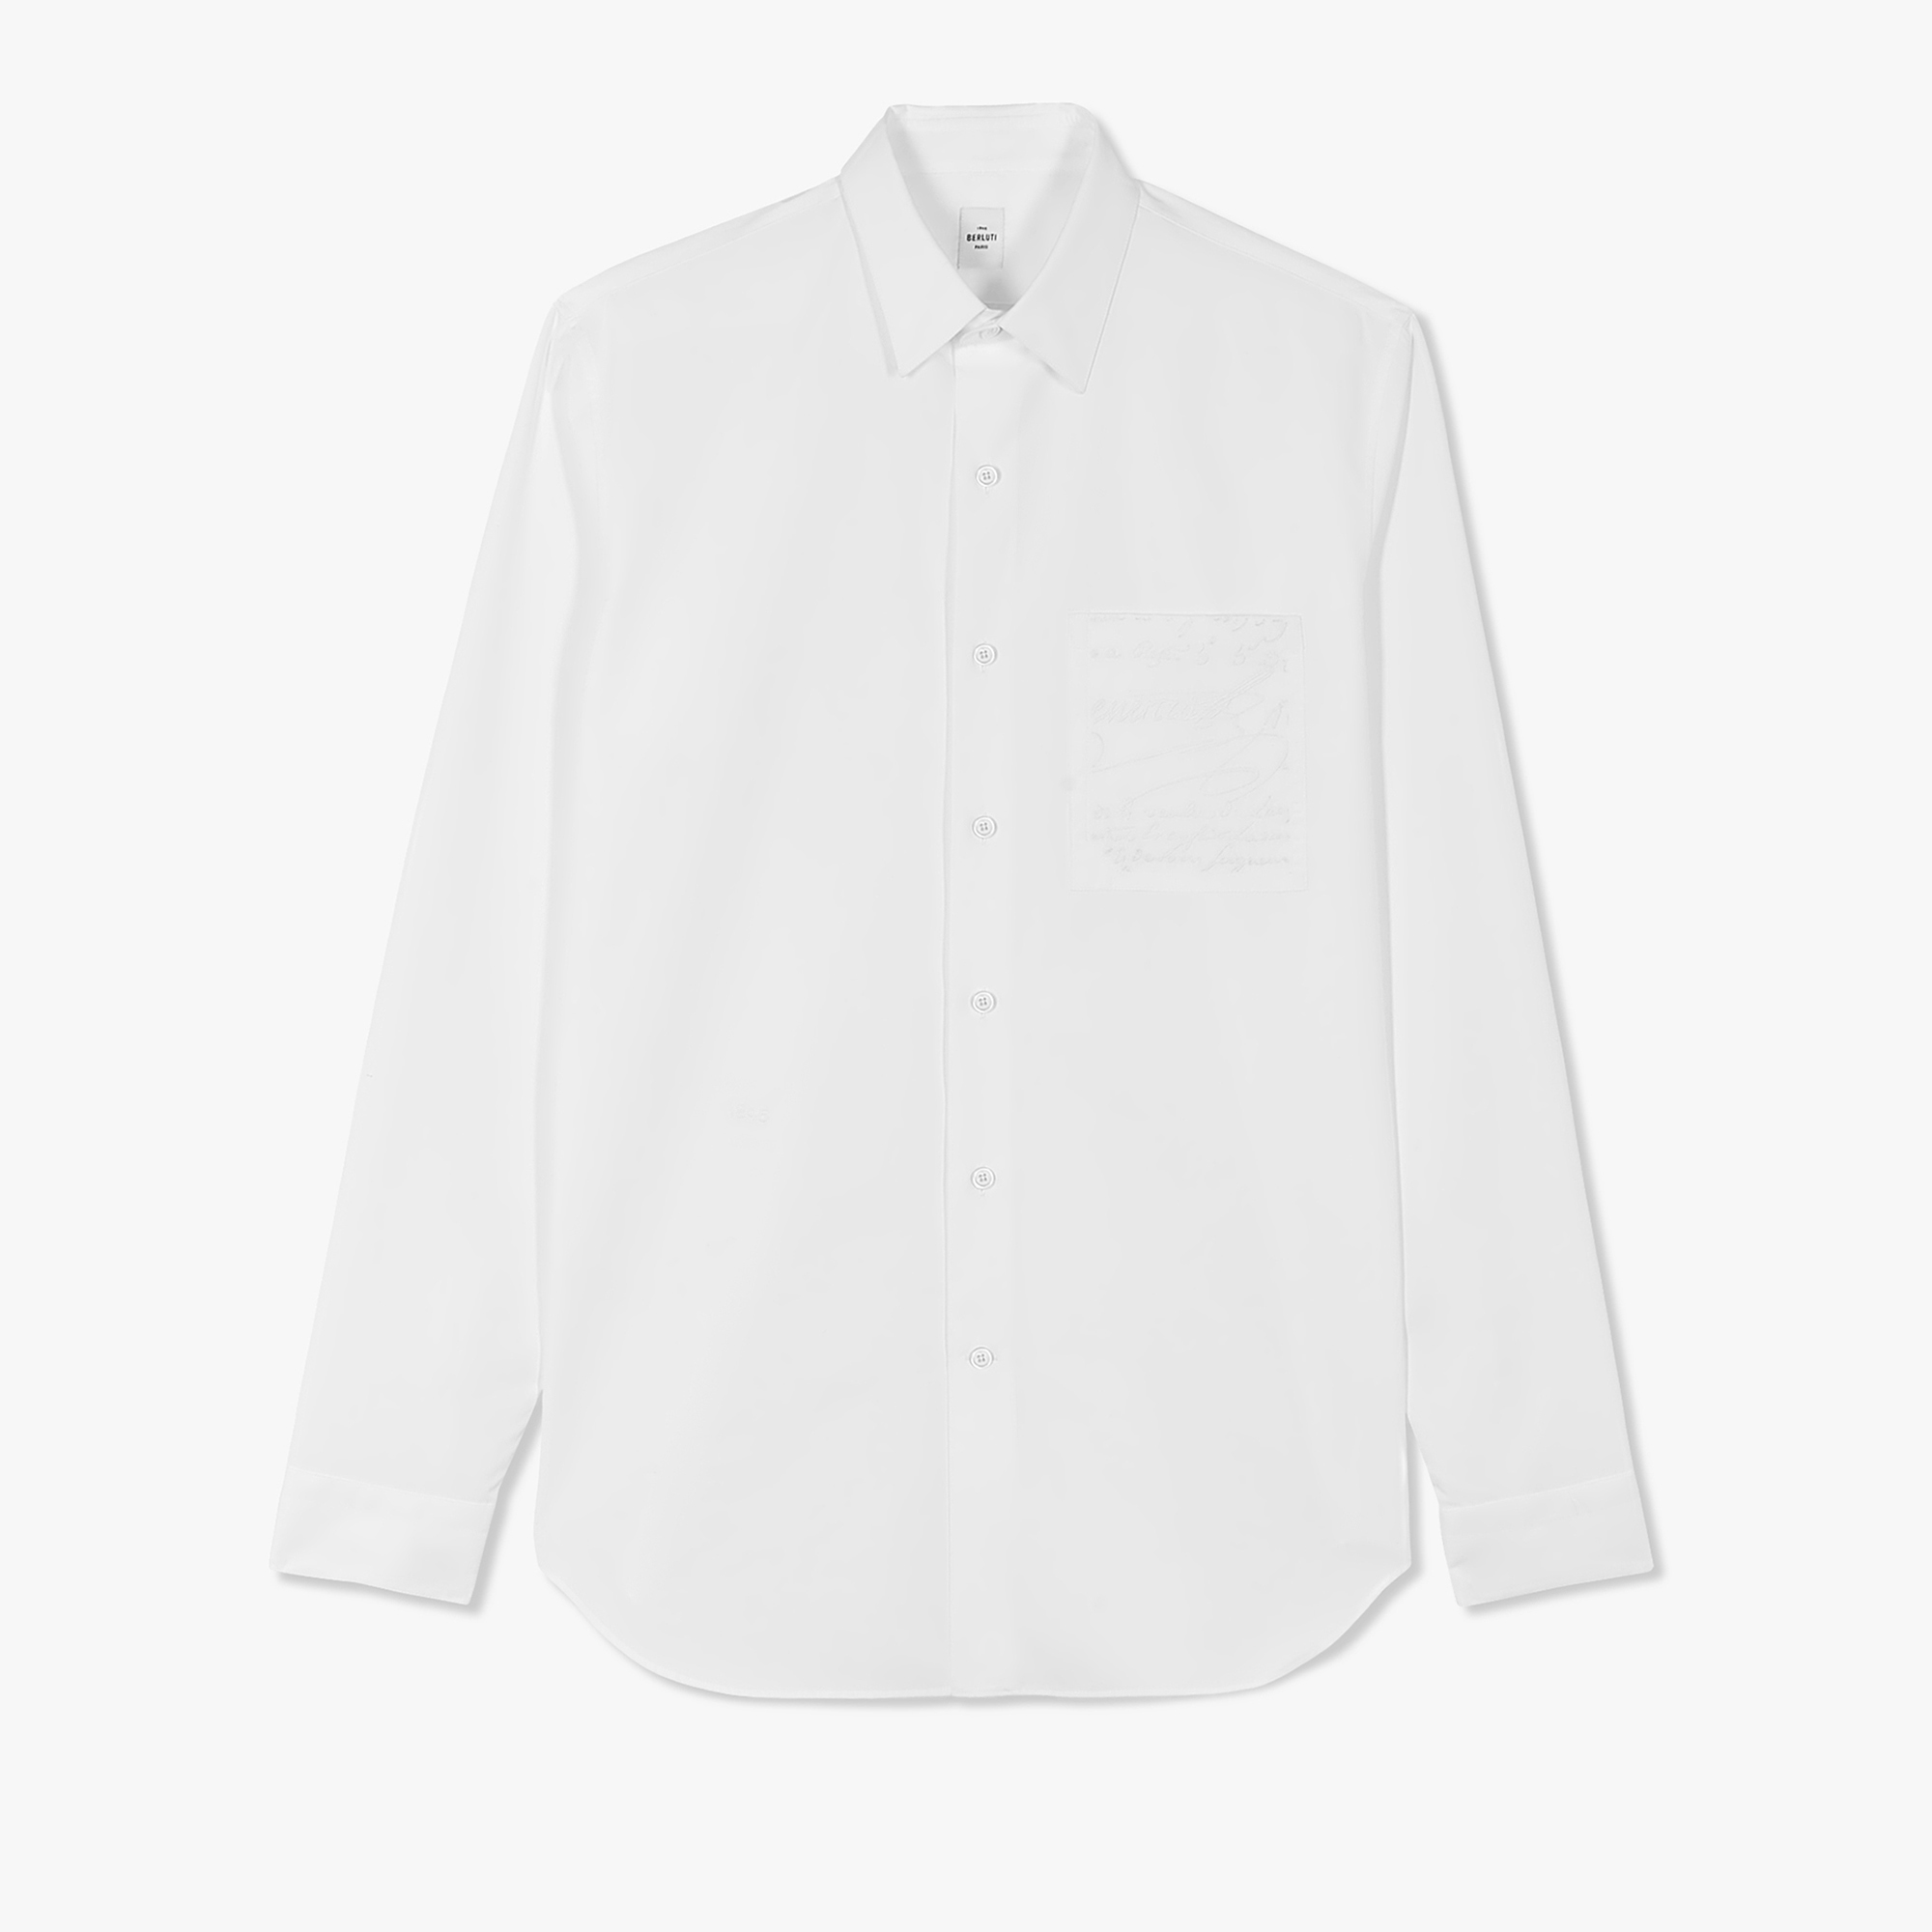 Poplin Shirt With Embroidered Scritto Pocket, BLANC OPTIQUE, hi-res